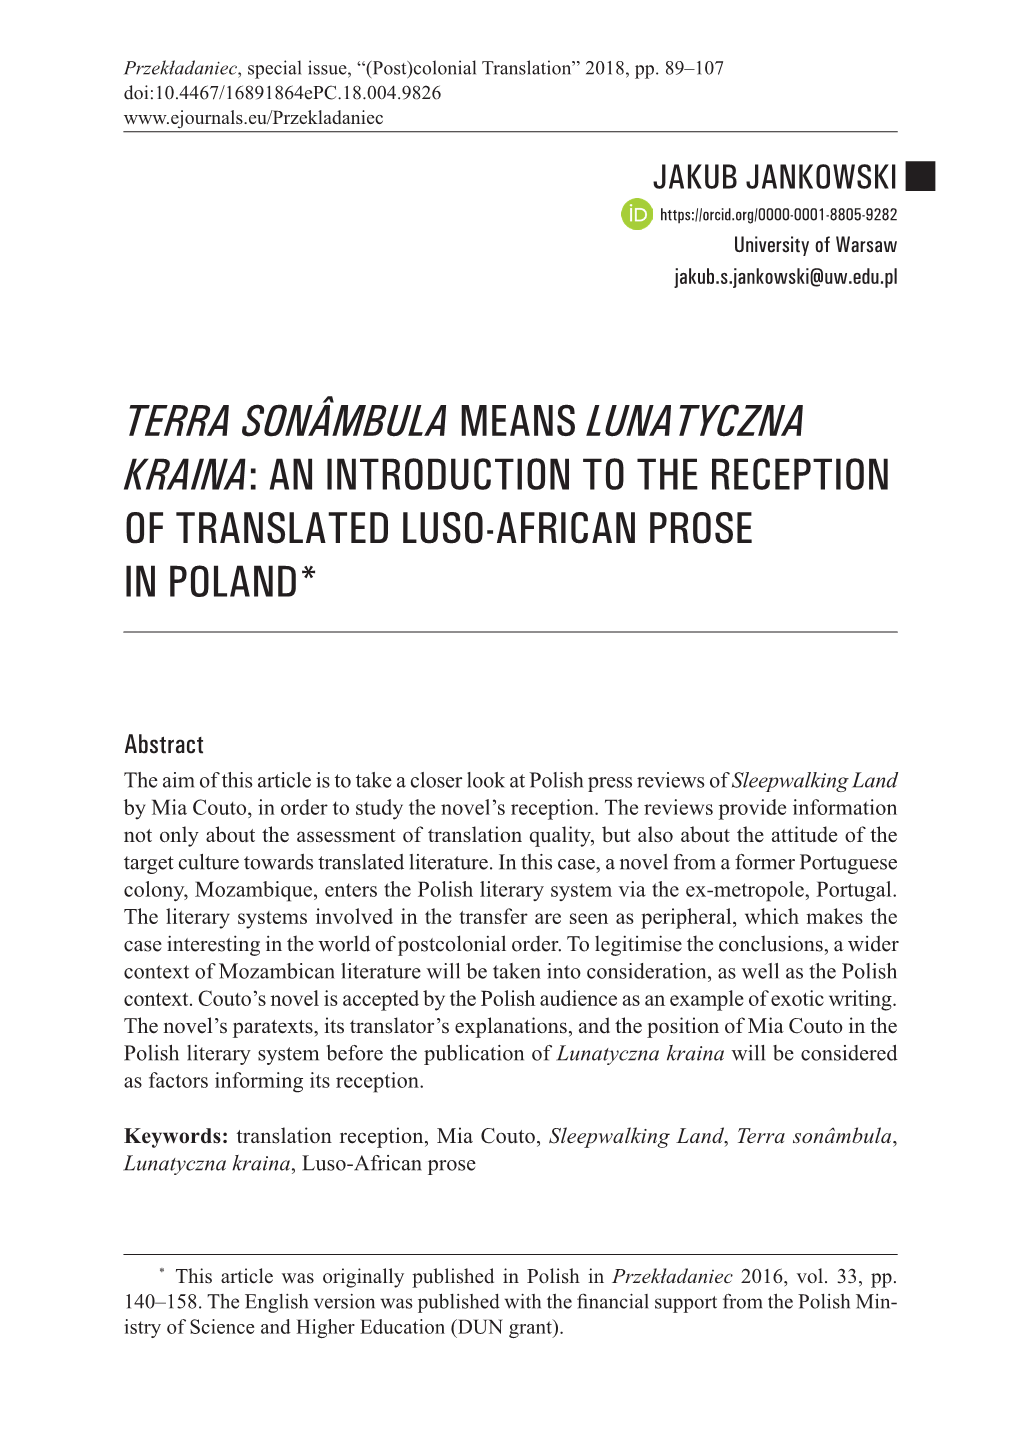 Terra Sonâmbula Means Lunatyczna Kraina: an Introduction to the Reception of Translated Luso-African Prose in Poland*